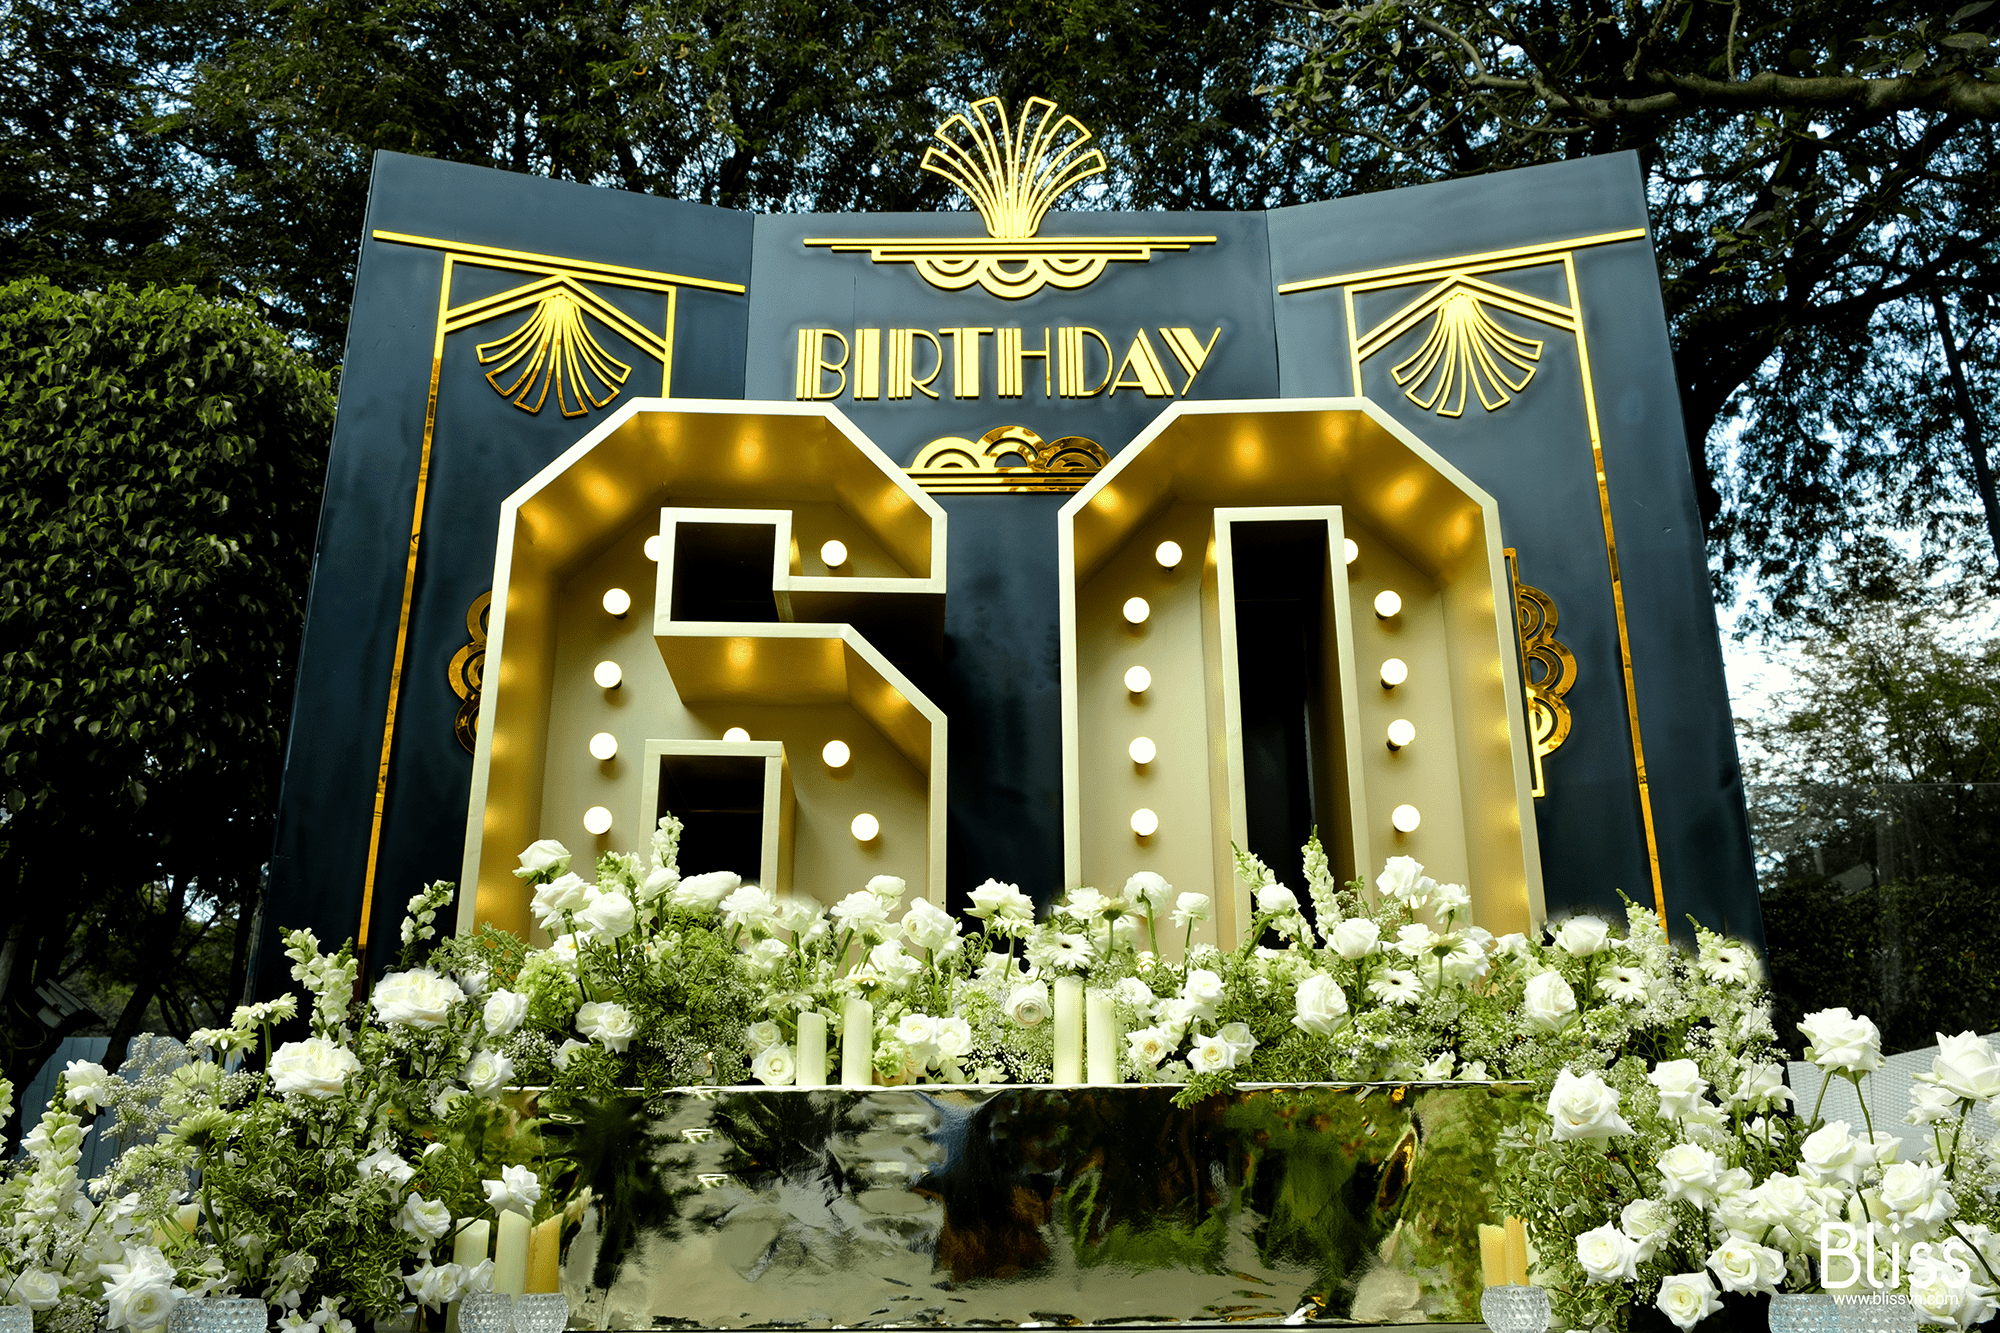 Get ready to party with our 60th birthday decorations for a memorable celebration